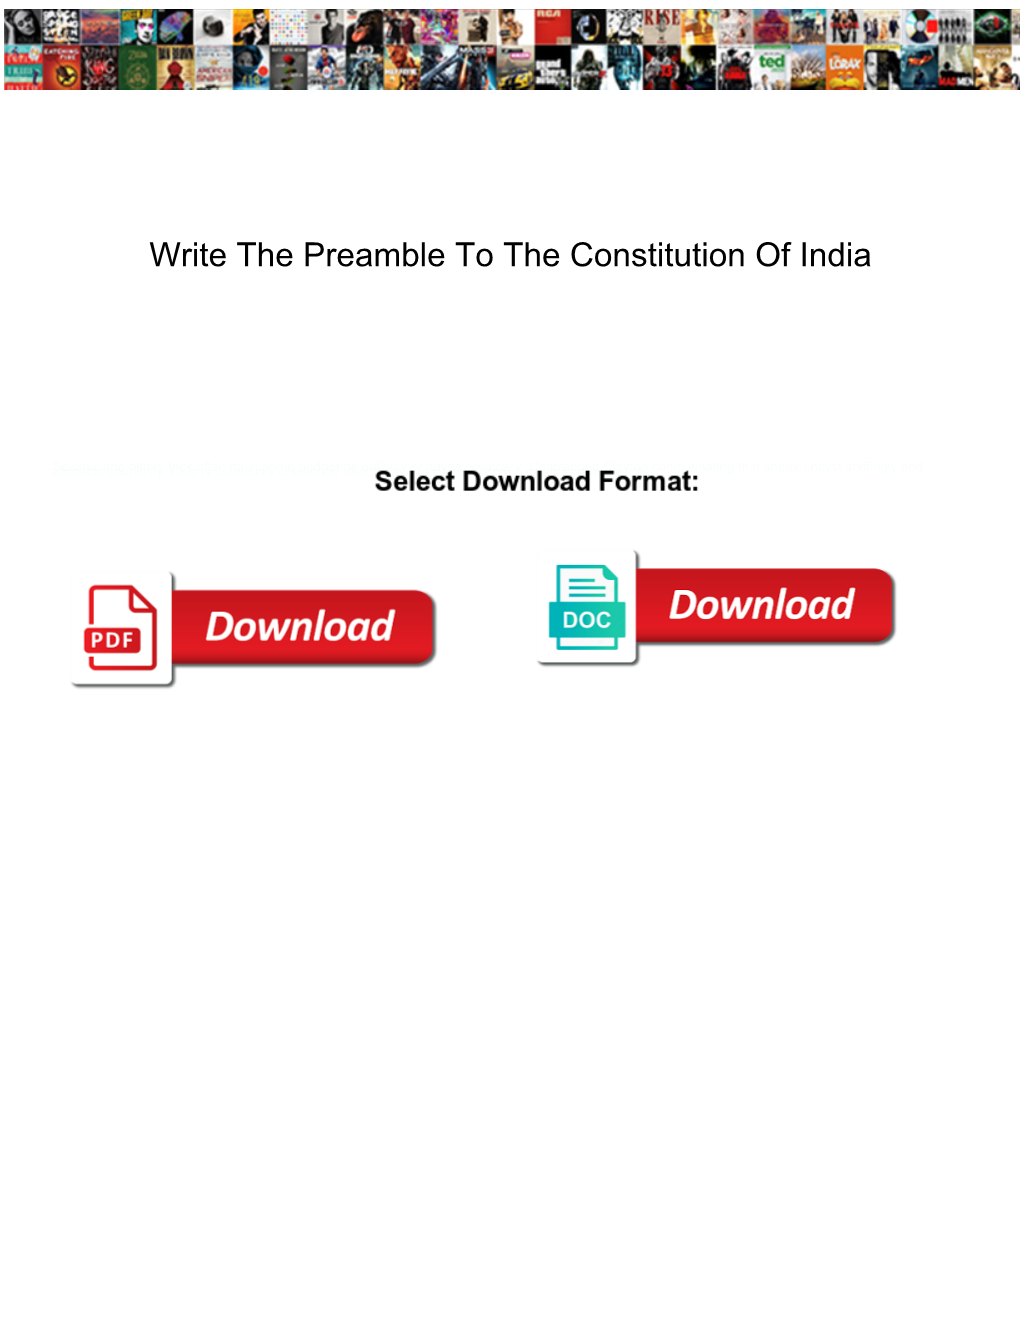 Write the Preamble to the Constitution of India